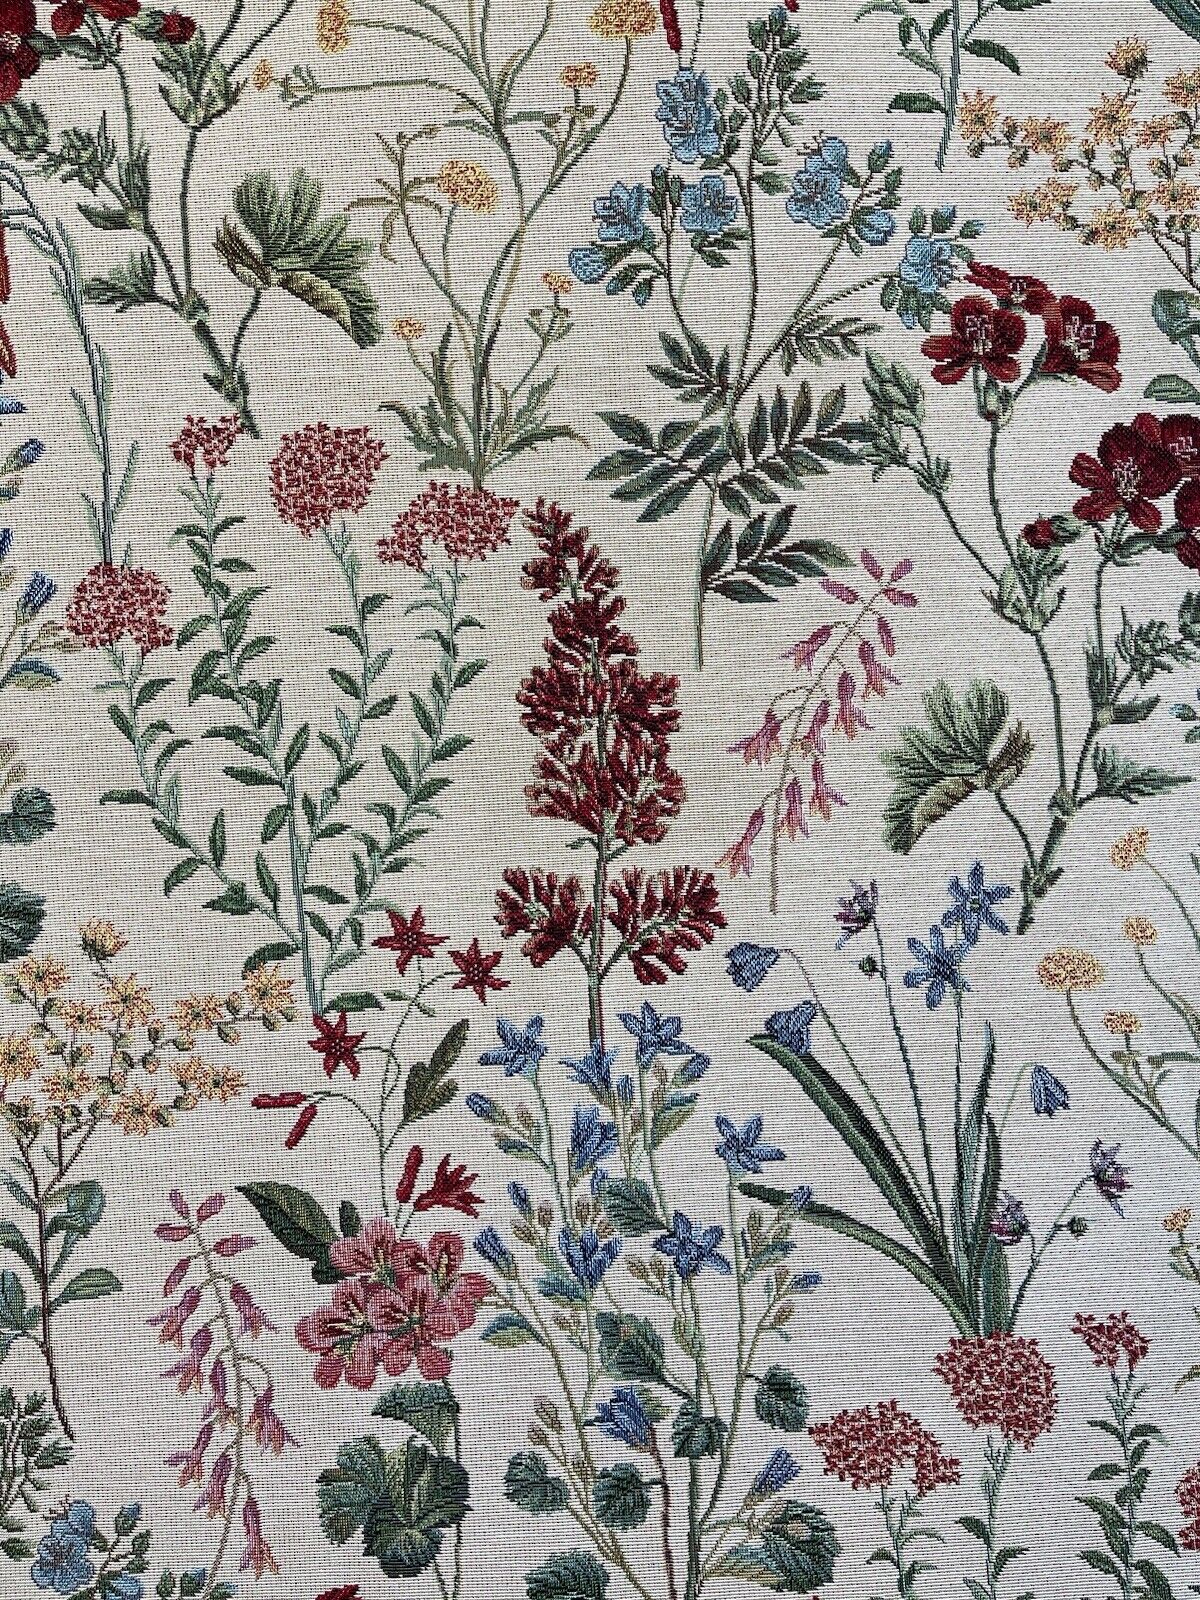 Wildflower Meadows Beige Woven Floral Upholstery Fabric